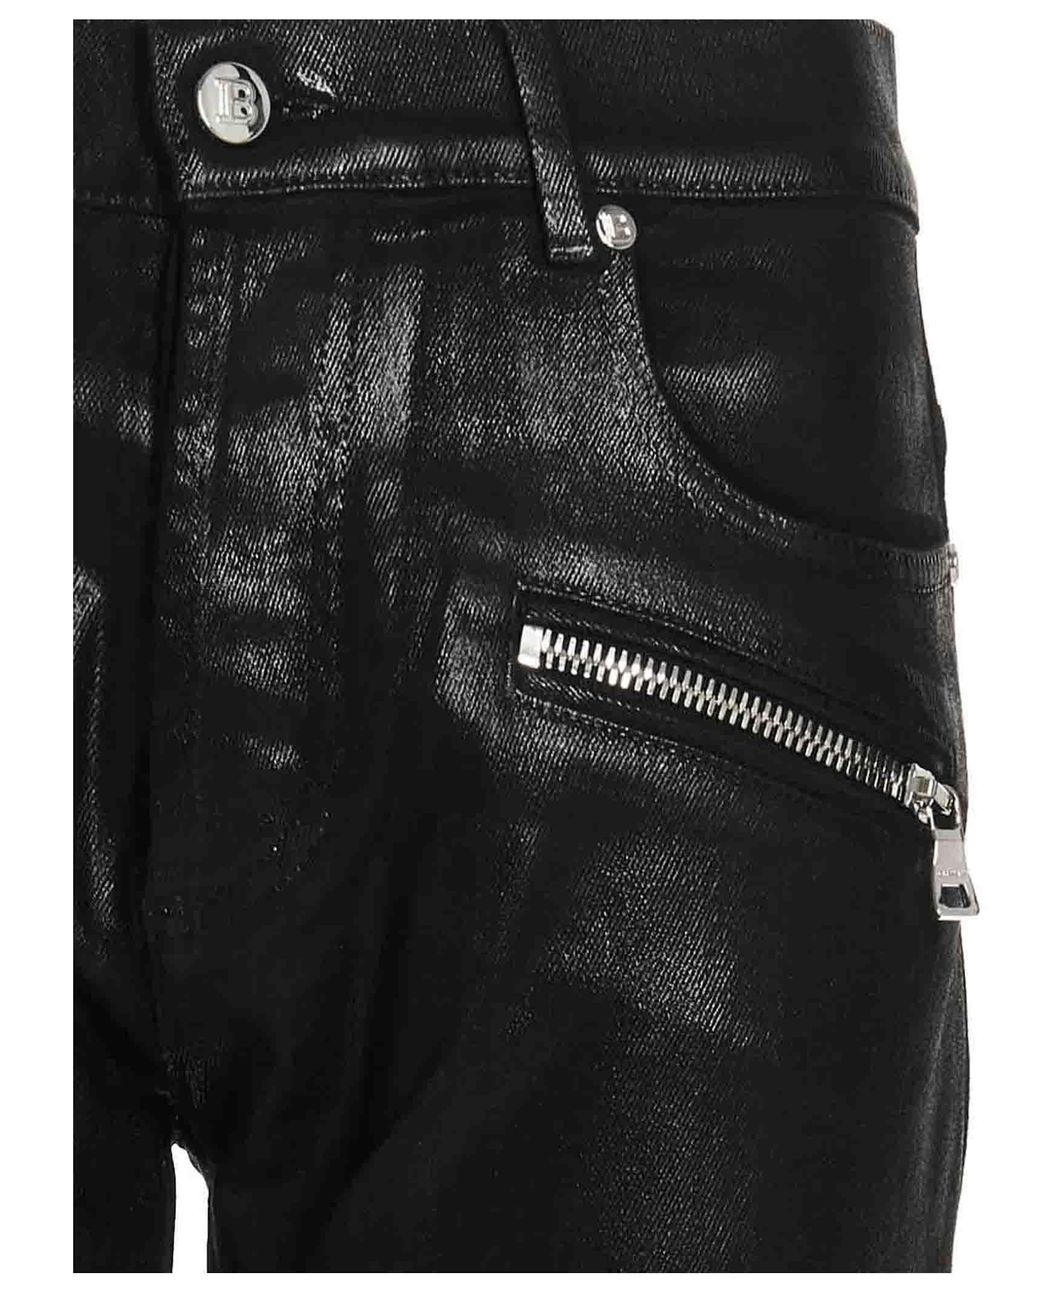 The Black Coated High Waist Ankle Skinny | 7 For All Mankind